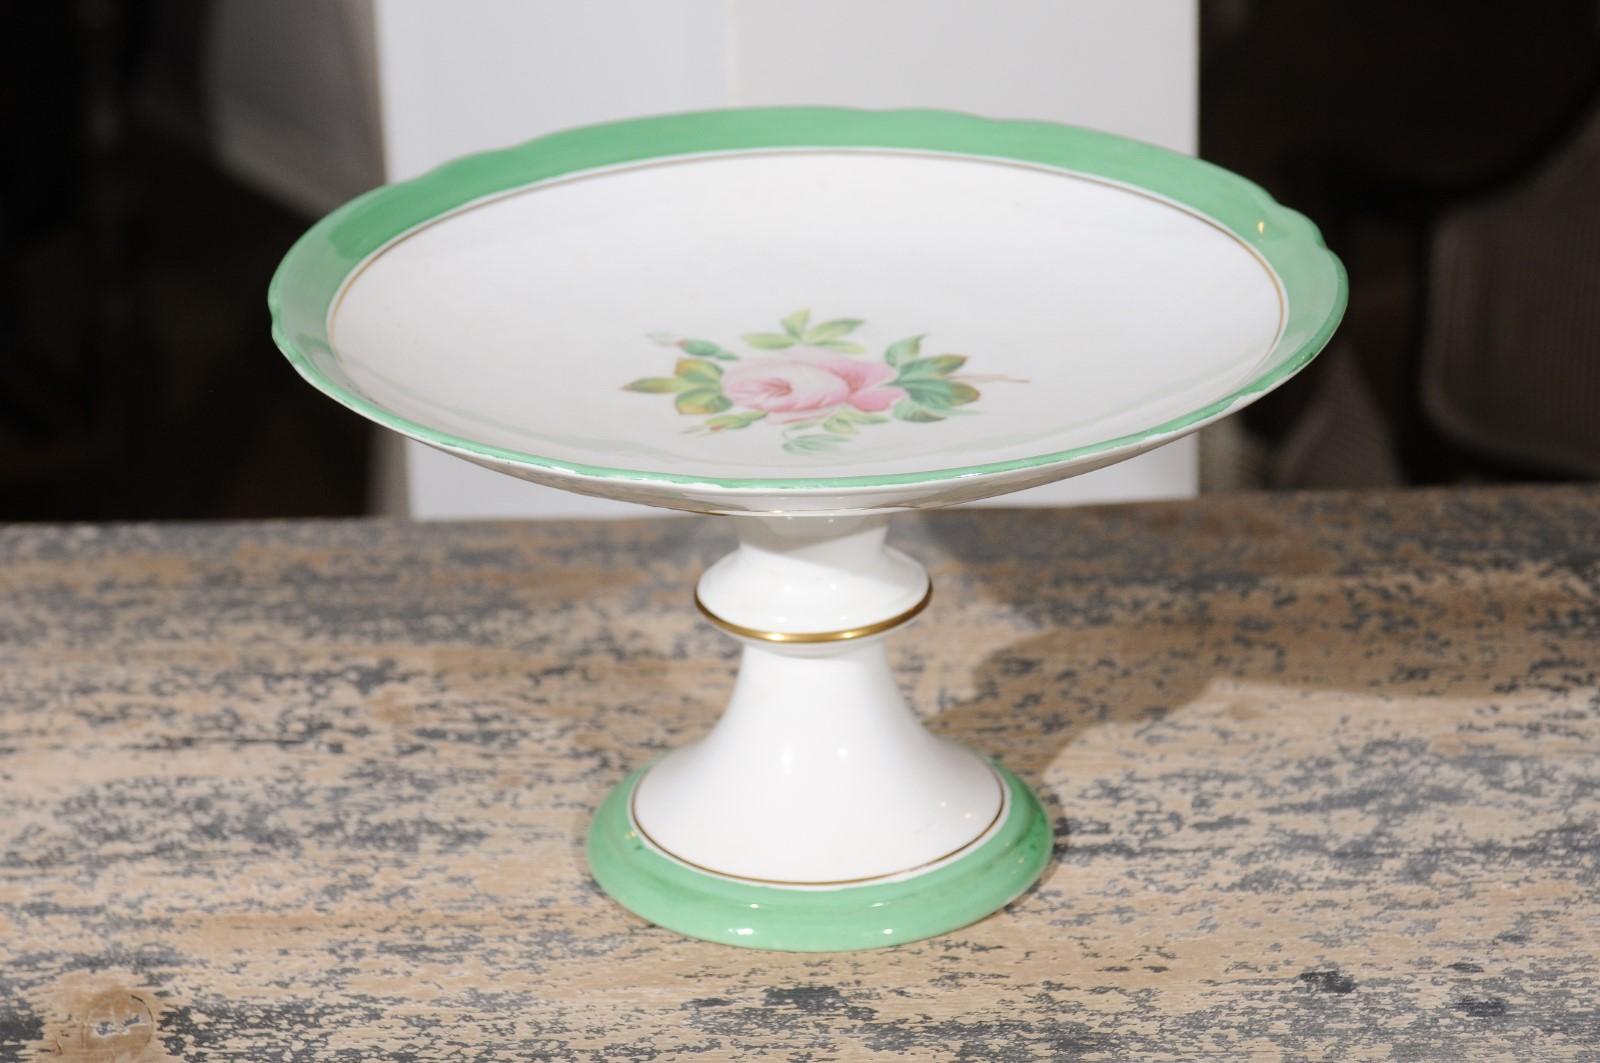 English Victorian 1880s Botanical Compote with Roses, Green and Gold Accents For Sale 2